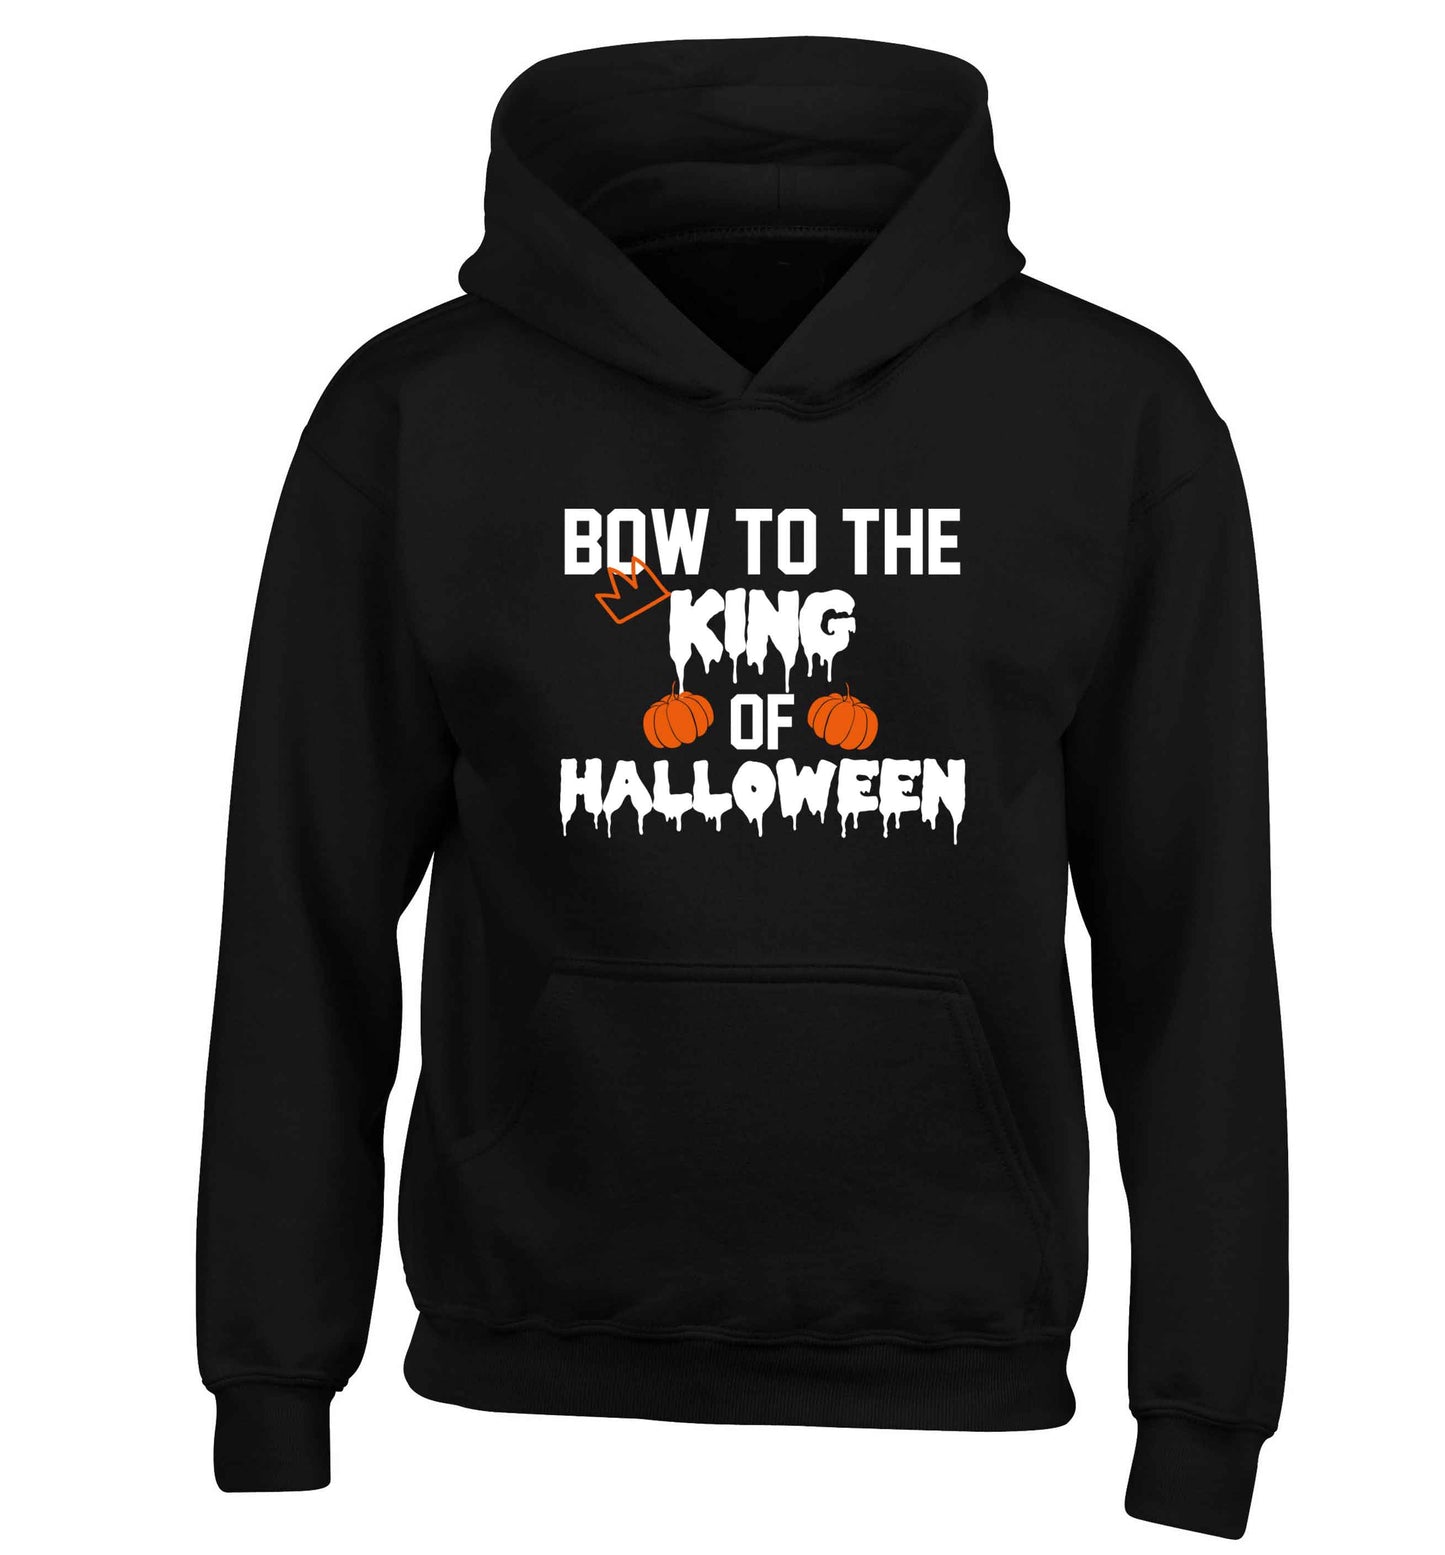 Bow to the King of halloween children's black hoodie 12-13 Years